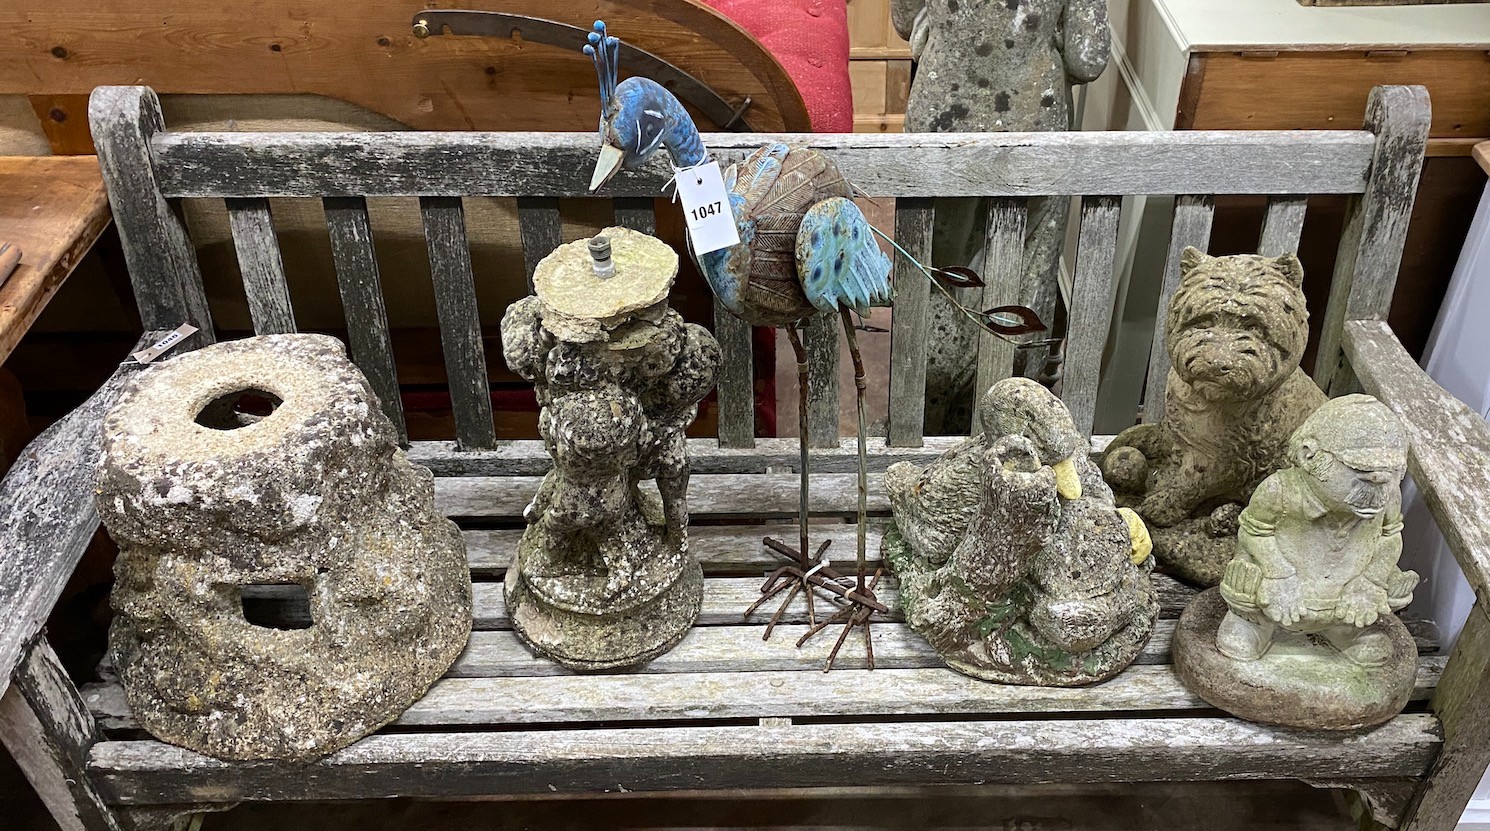 A group of four reconstituted stone garden ornaments and a painted metal peacock